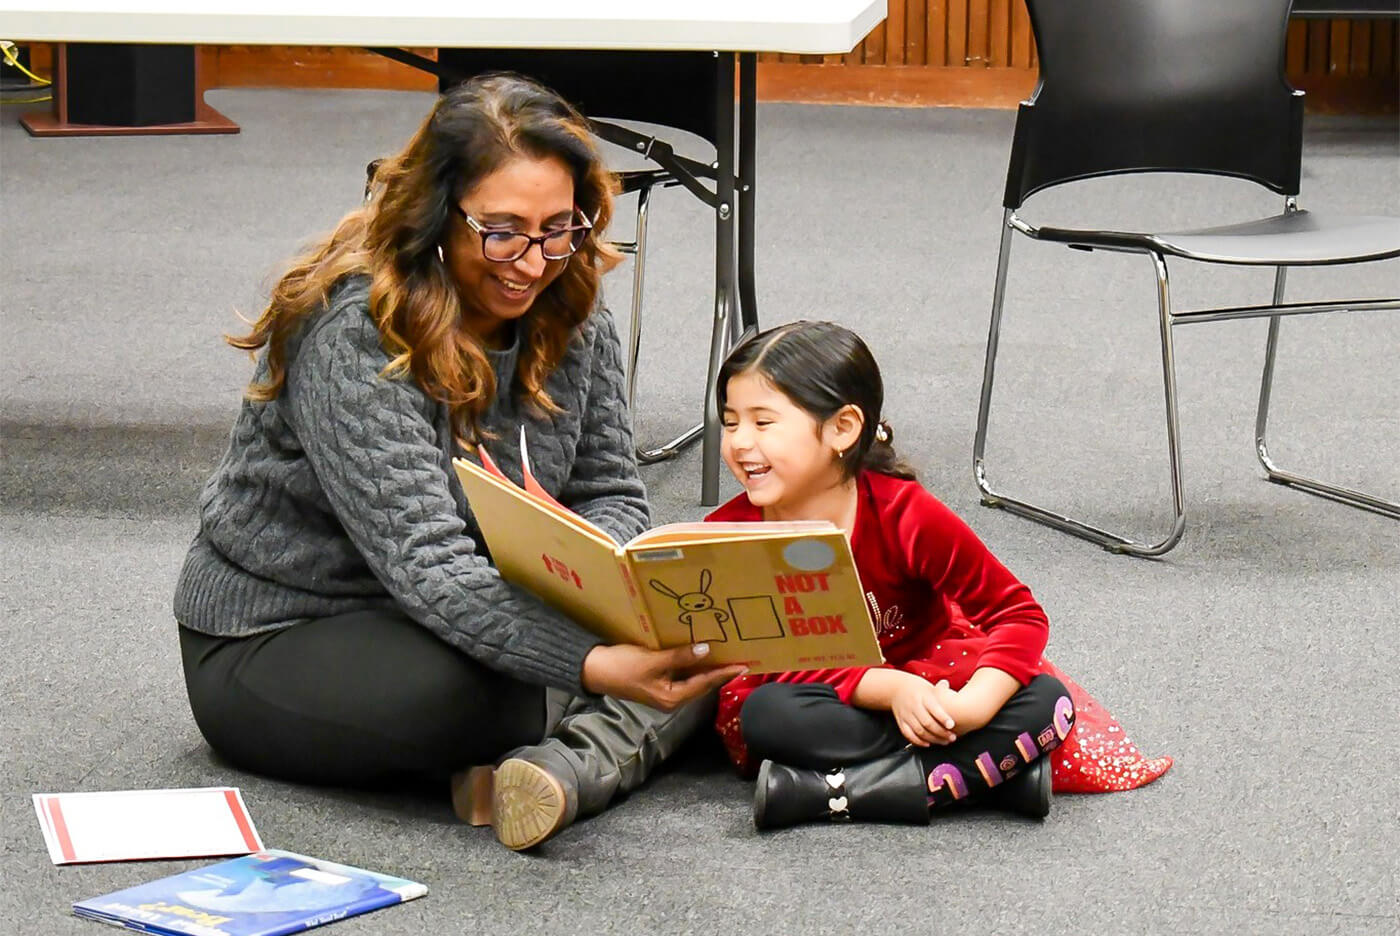 Adult Reading book to child on the floor